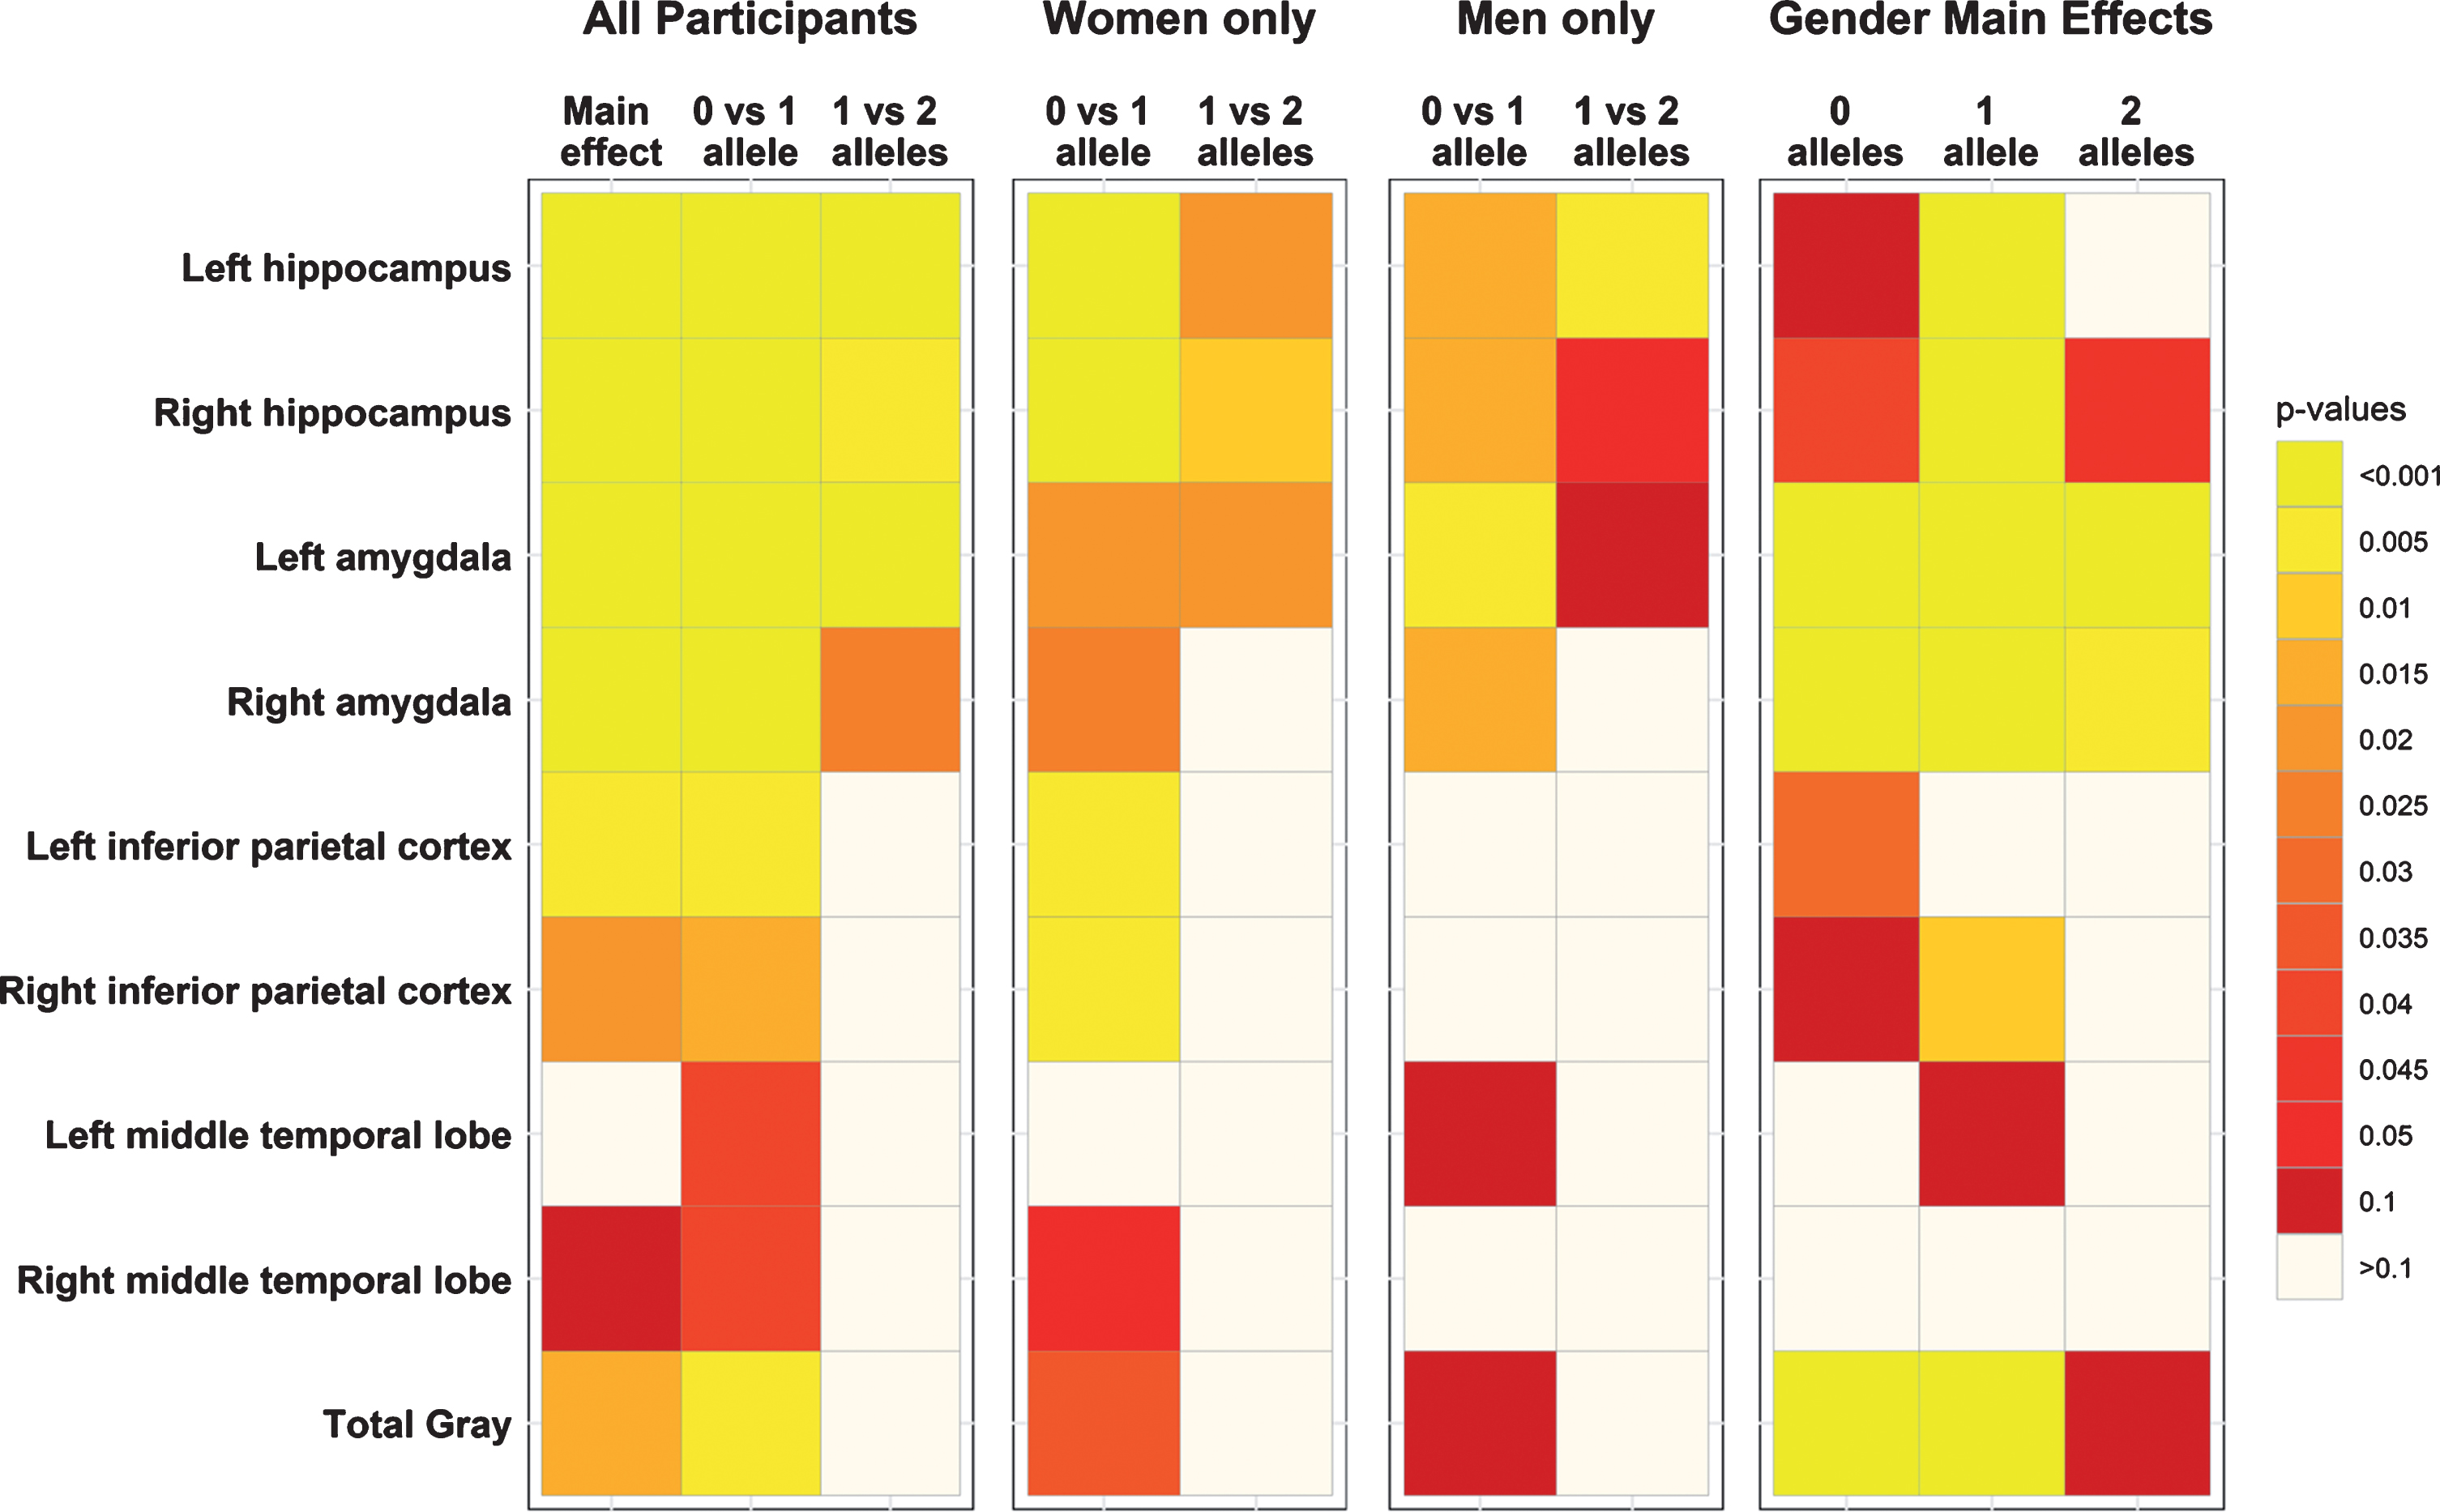 Significance heatmaps for brain regions of interest. Region of interest p-value heatmaps showing significant APOE ɛ4 effects for all participants, sex-stratified effects, and the main effects of sex by APOE ɛ4 allele.